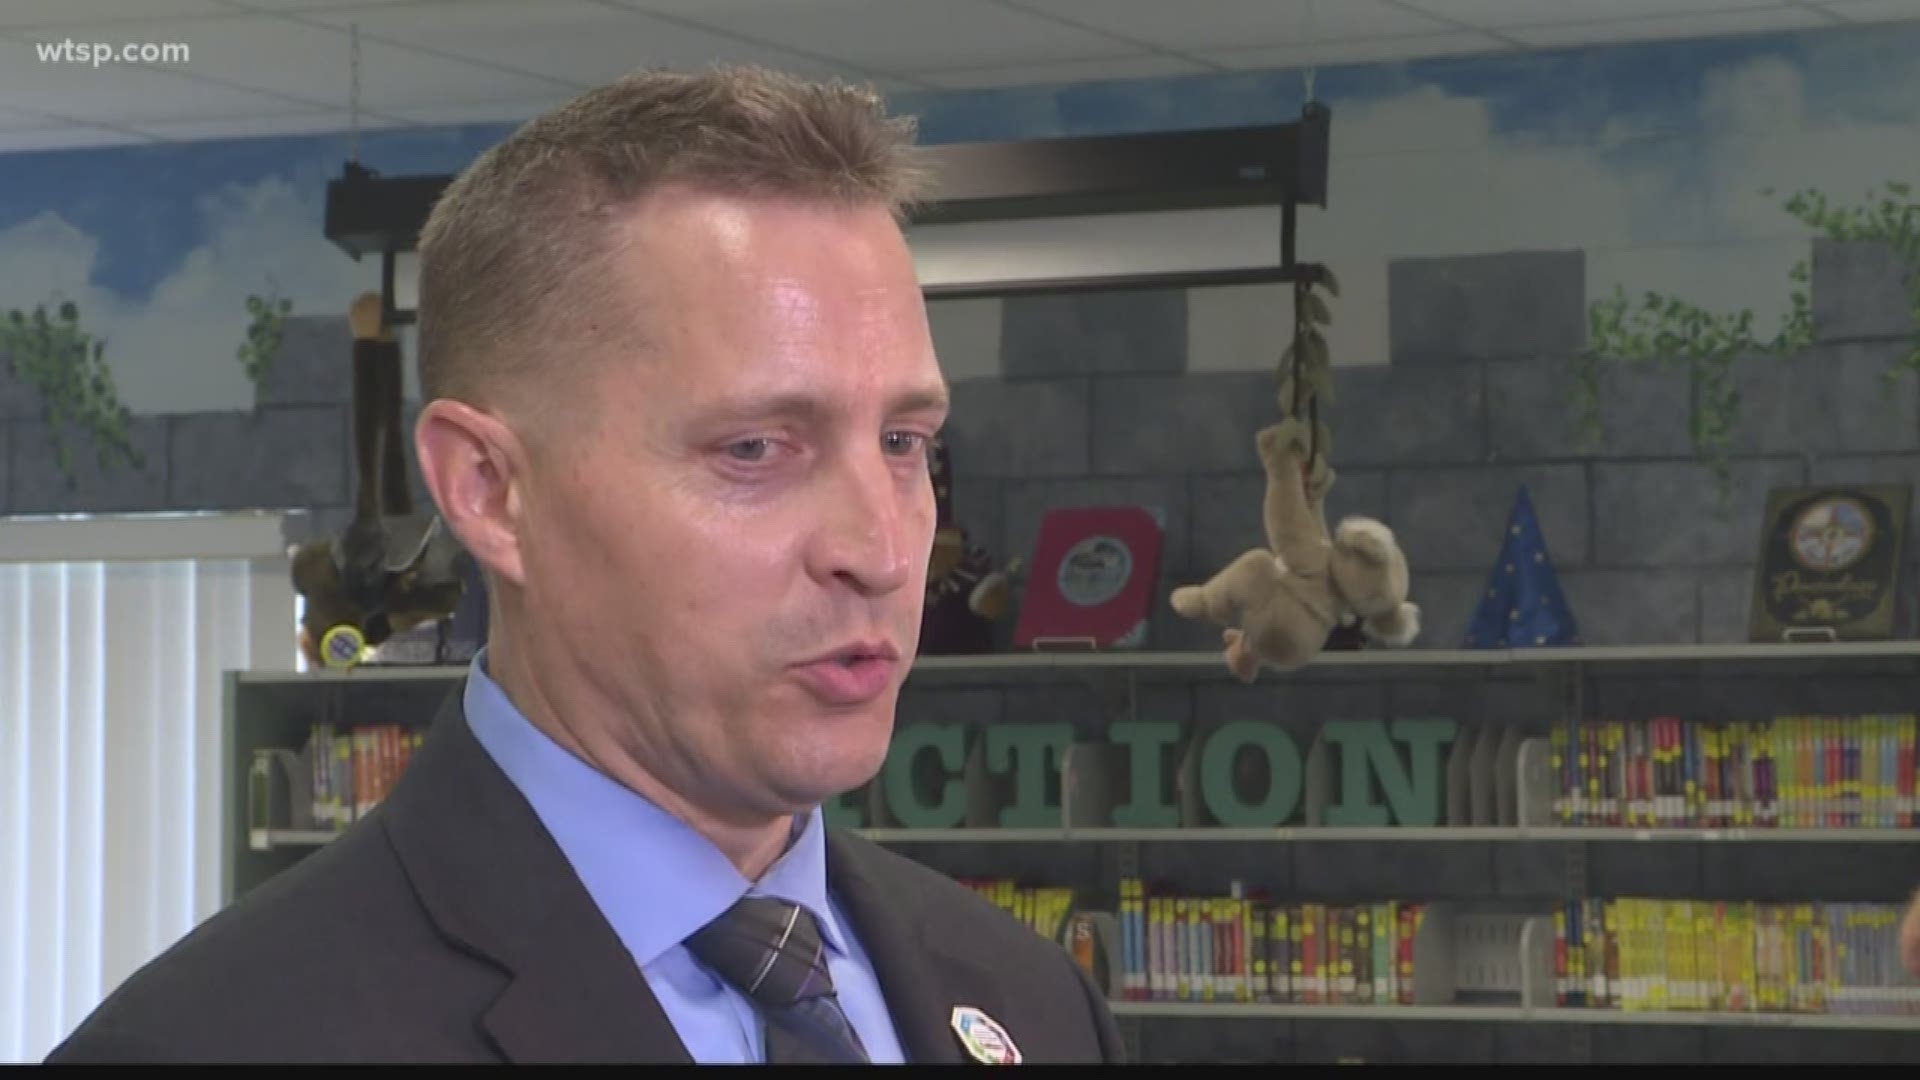 In a letter to school board members, Jeff Eakins said his last day would be June 30, 2020. Eakins said the decision was made so he could spend more time with his family.

Four years ago, the district faced one of its worst financial crises in history with 17 schools rated 'F' and declining graduation rates, Eakins explained. Now, four years later, he says the district's financial picture is much stronger, and there are fewer 'F'-rated schools along with a greatly-improved graduation rate.